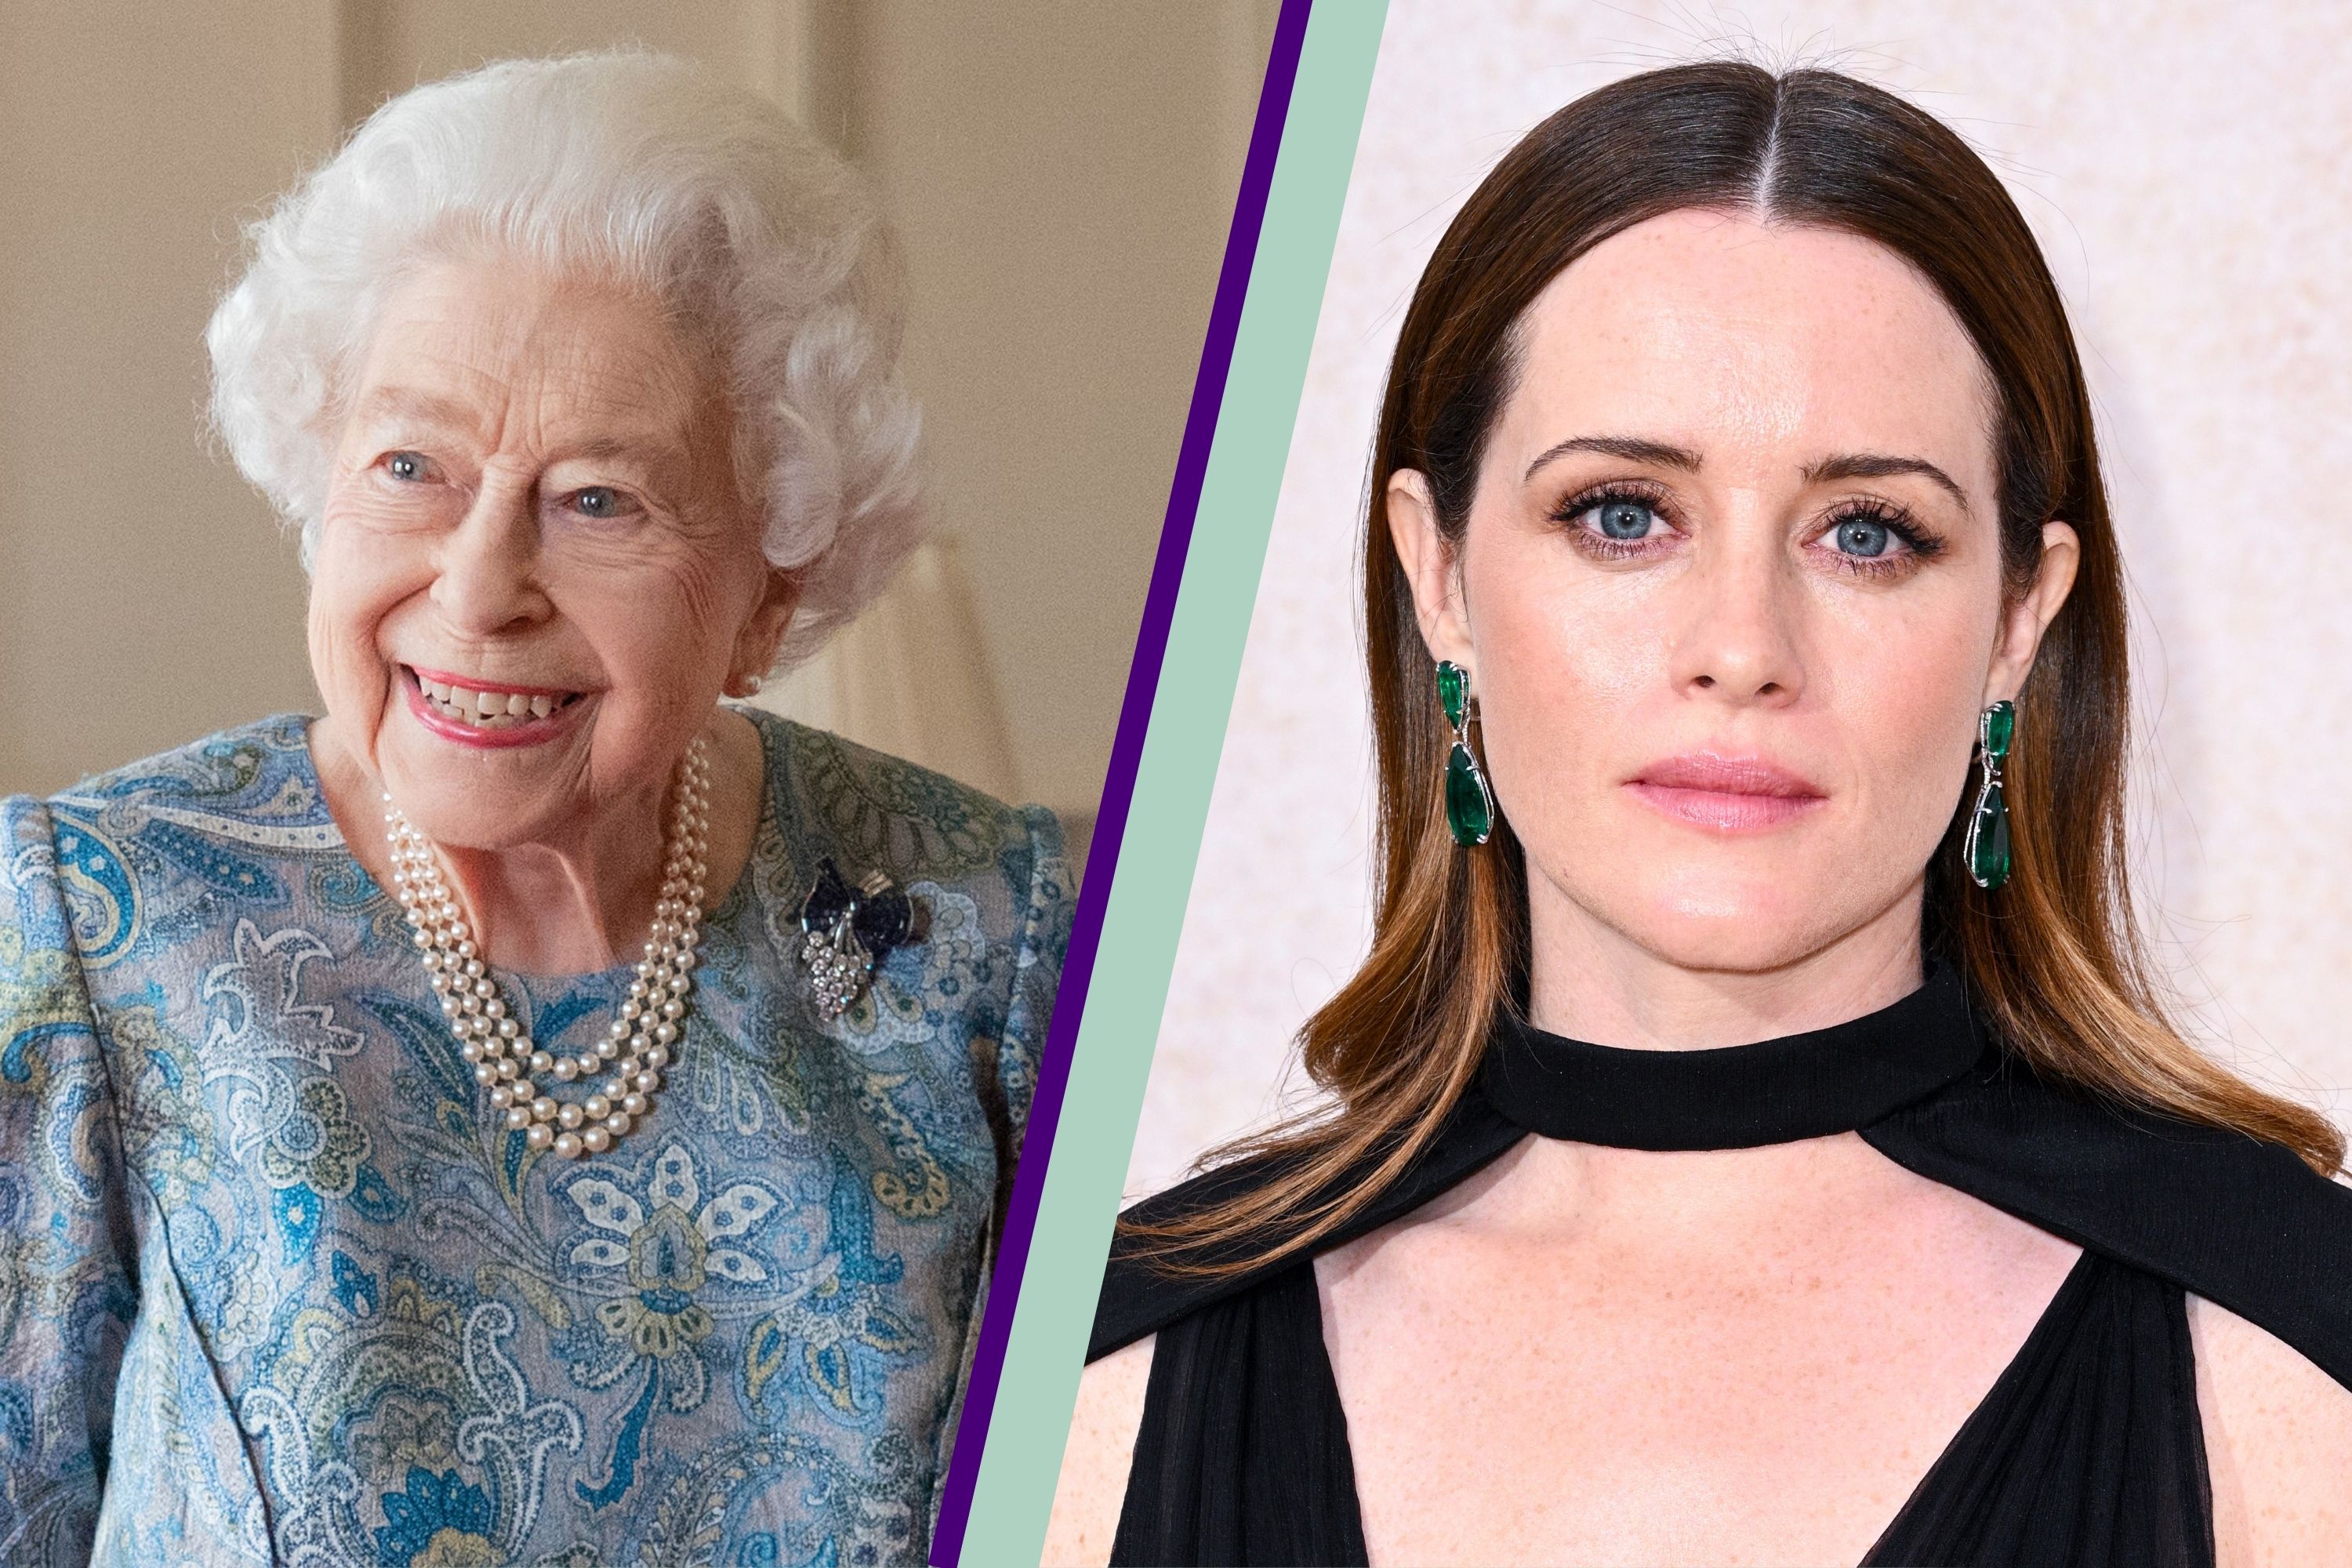 Claire Foy on Playing Queen Elizabeth II in The Crown